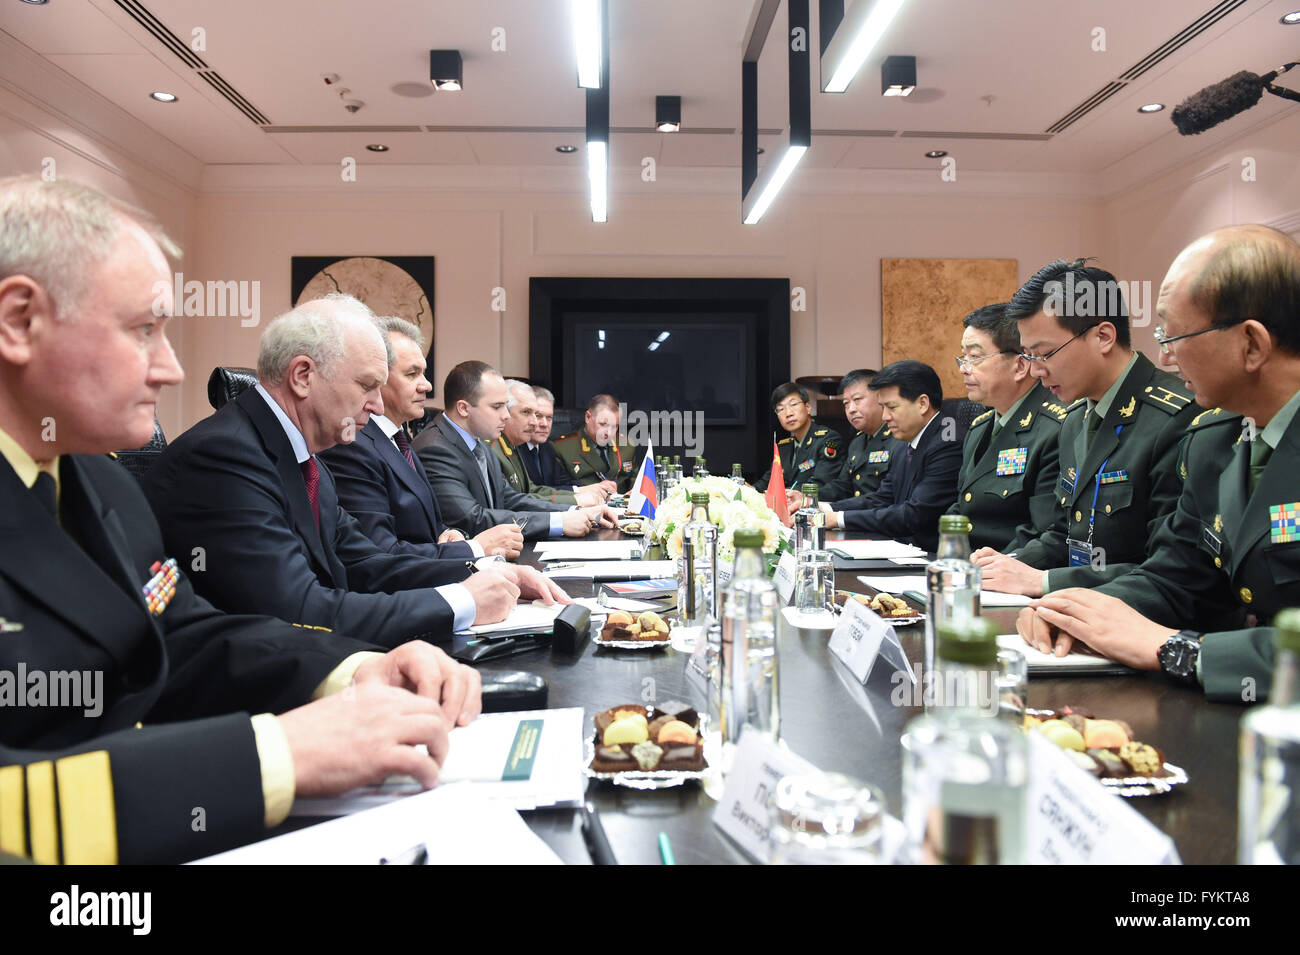 Moscow, Russia. 27th Apr, 2016. Chinese Defense Minister Chang Wanquan (3rd-R) meets with his Russian counterpart Sergei Shoigu (3rd-L) in Moscow, Russia, on April 27, 2016. Visiting Chinese Defense Minister Chang Wanquan met with his Russian counterpart Sergei Shoigu and discussed the development of bilateral military cooperation. © Dai Tianfang/Xinhua/Alamy Live News Stock Photo